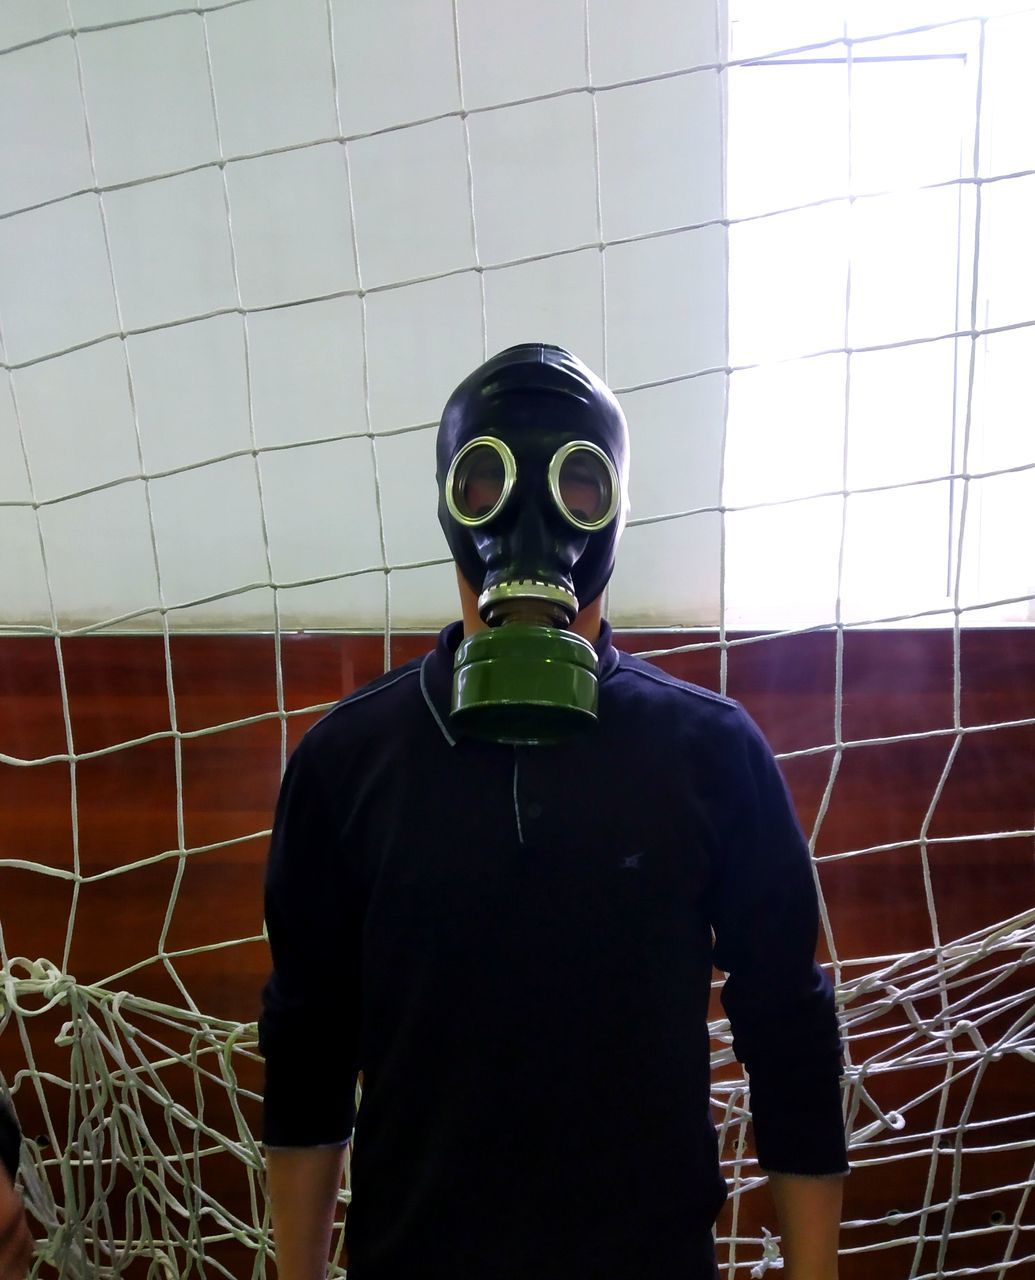 one person, clothing, waist up, adult, sports, front view, standing, men, portrait, indoors, player, mask, costume, person